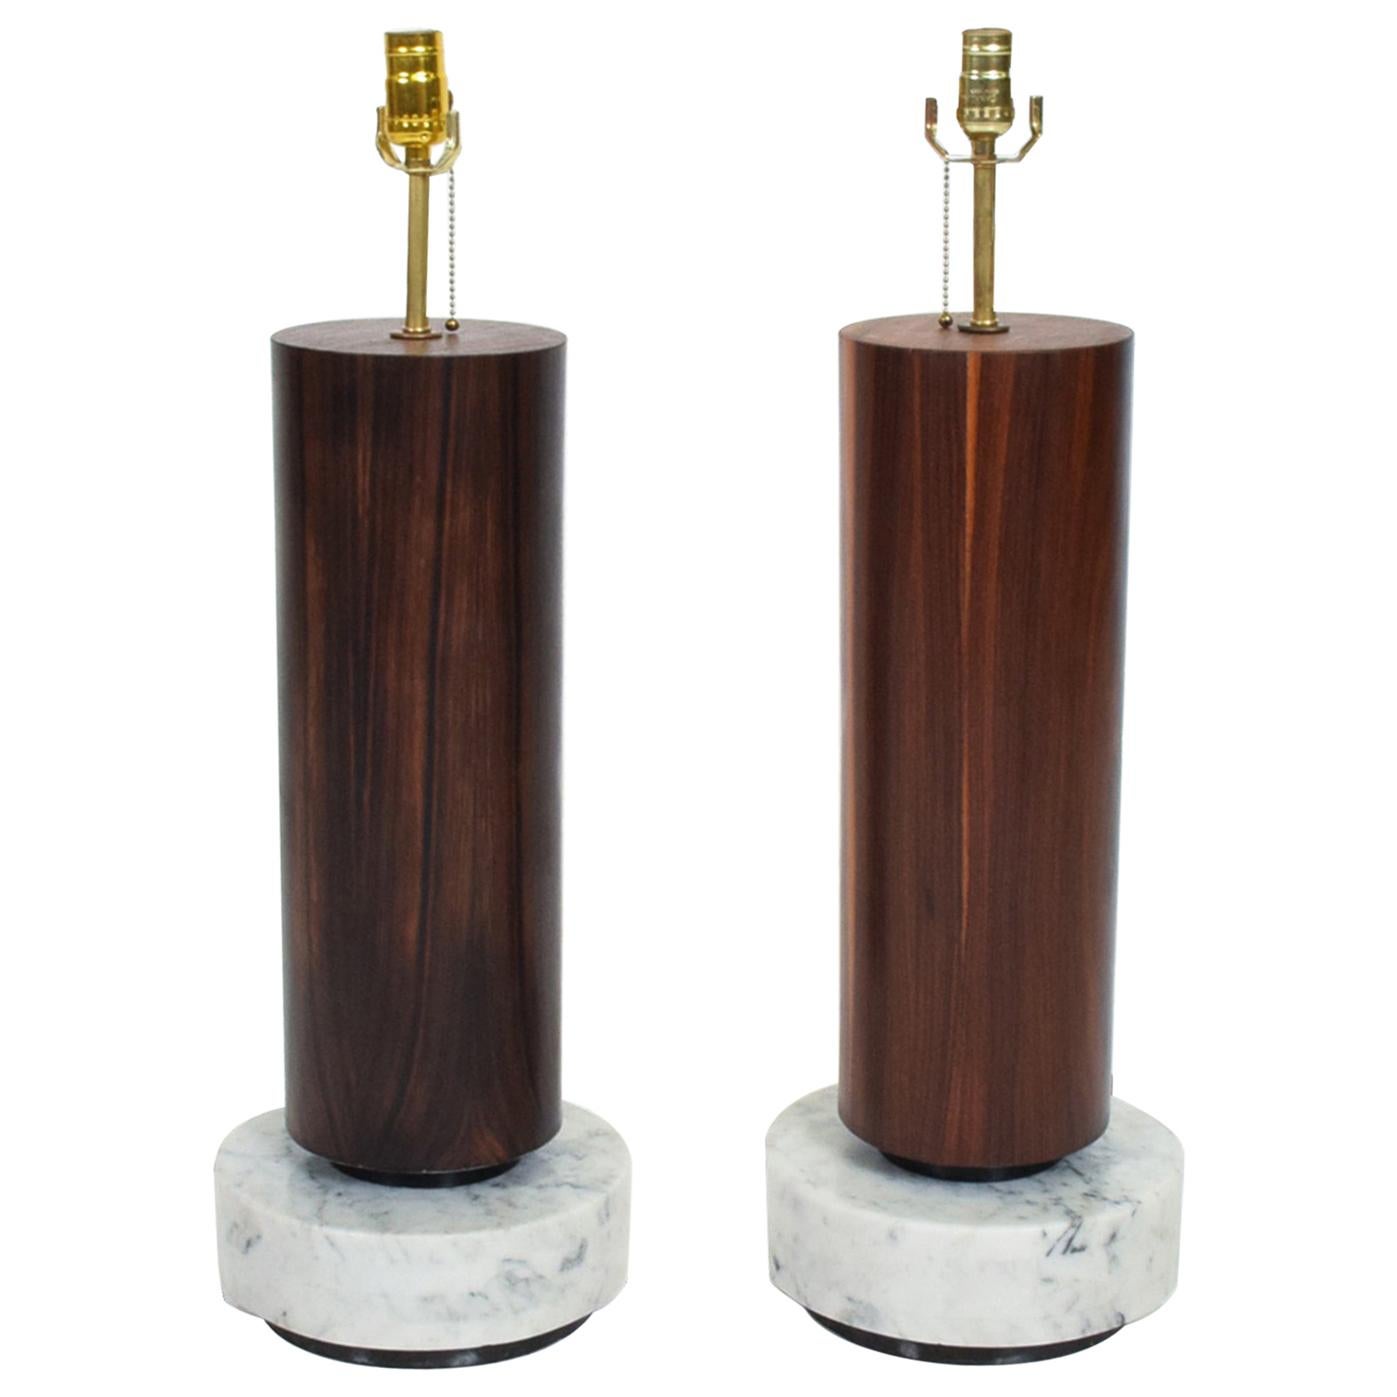 Mexican Modernism Tall Cylinder Table Lamps Marble & Rosewood 1960s Mexico City